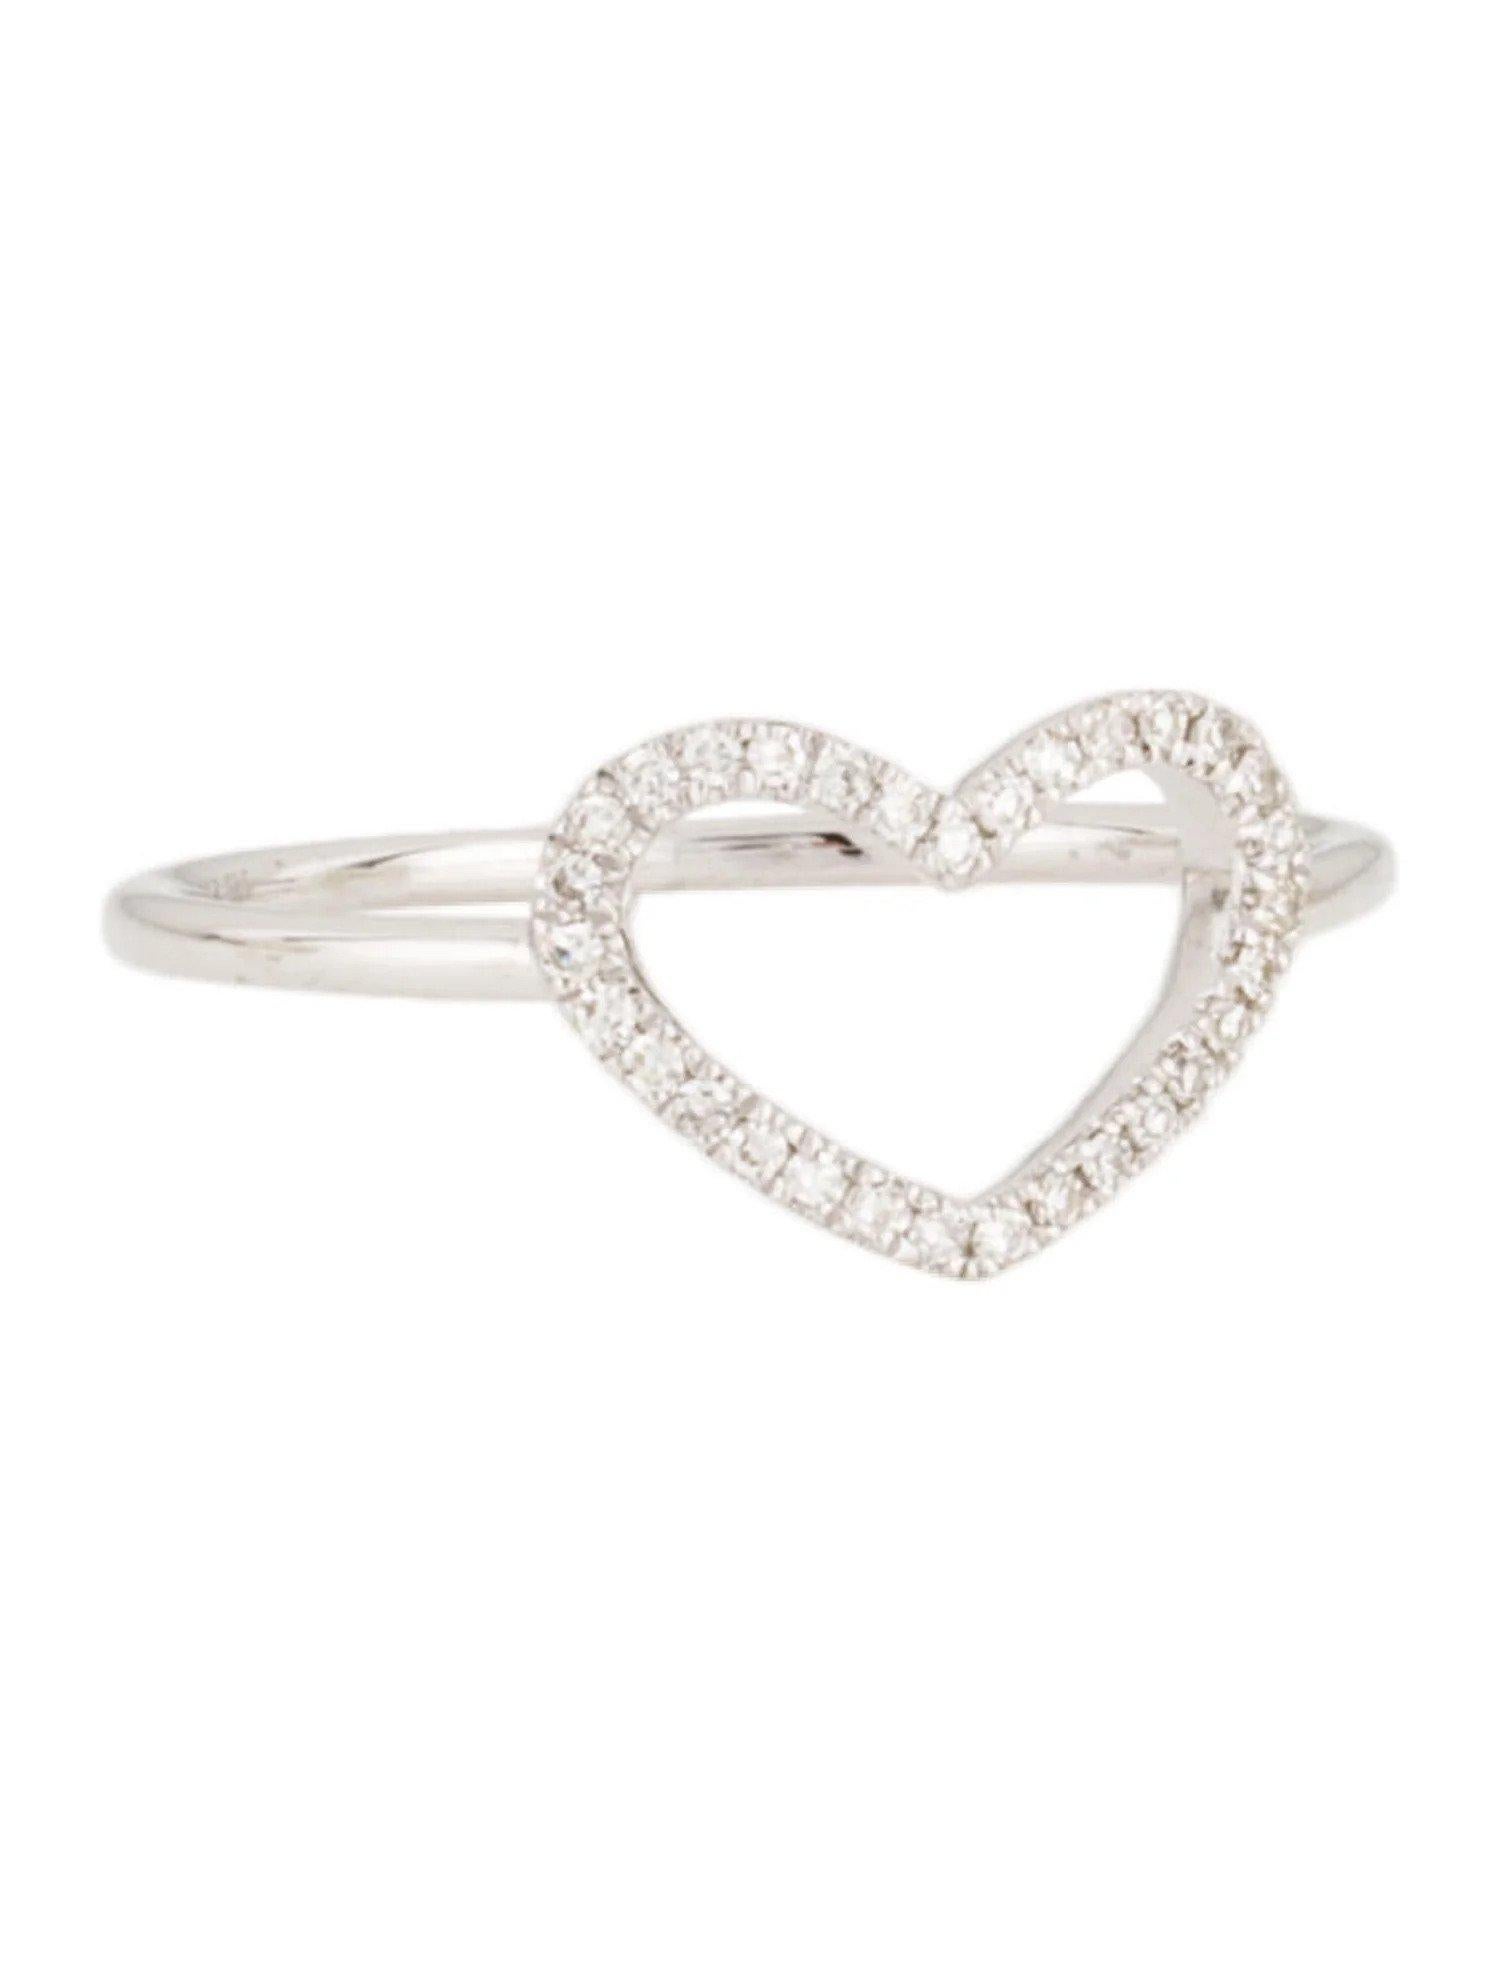 Fashion Ring Set: Made from real 14k gold and round diamonds approximately 0.08 ct. Certified diamonds, available in white, rose, yellow gold  with a color and clarity of GH-SI 
 Surprise Your Loved Ones with Our Open Heart Shaped Diamond Ring For